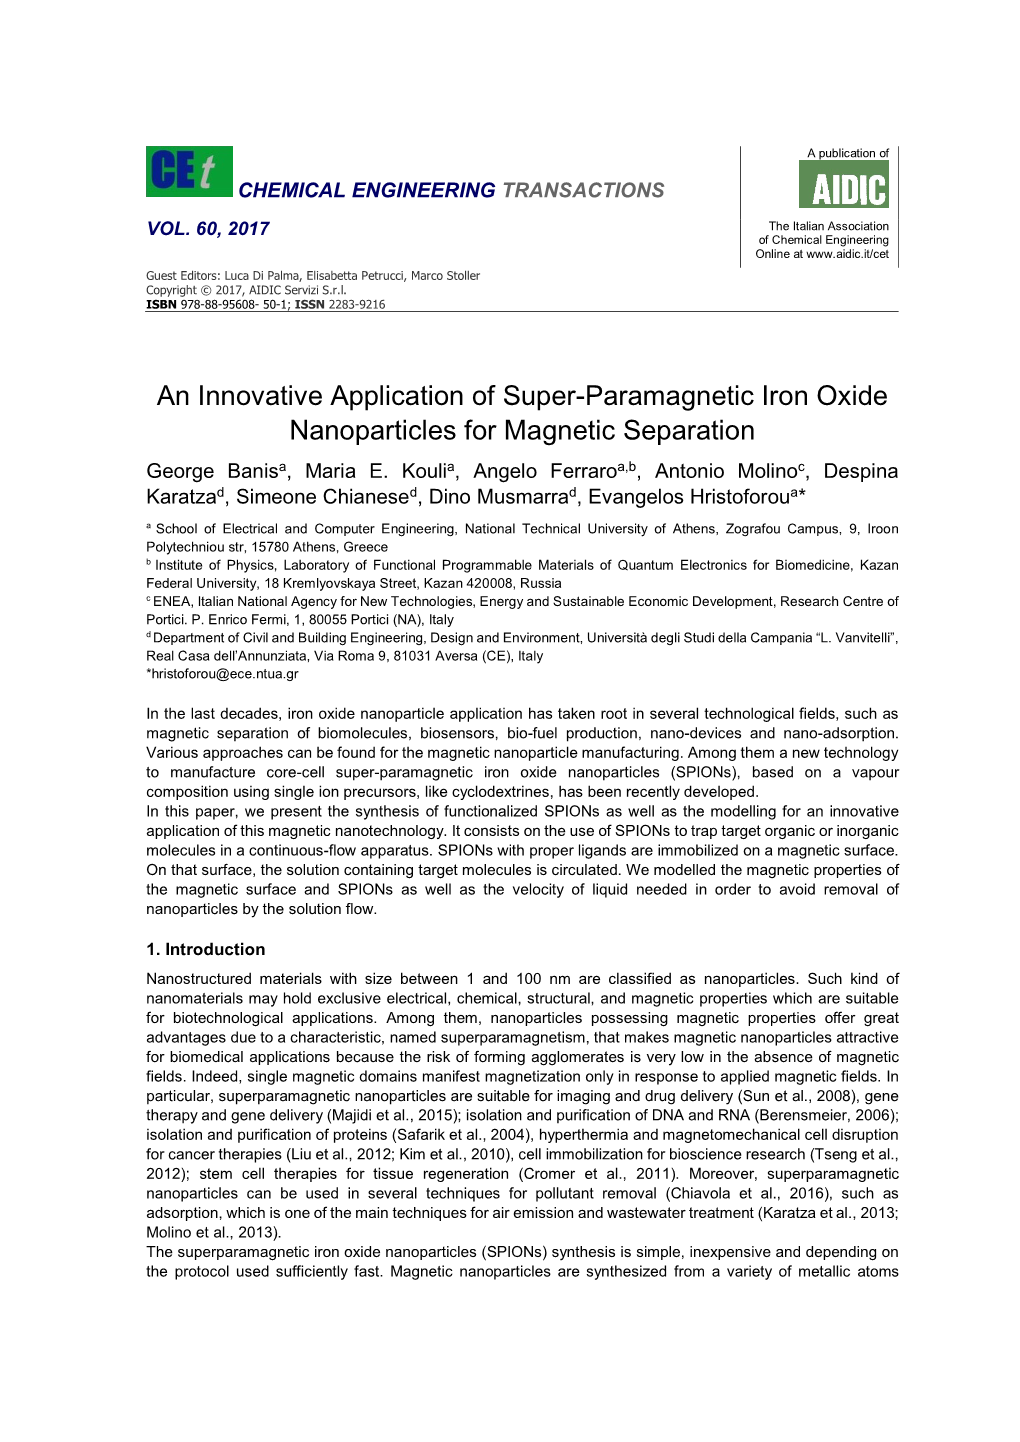 An Innovative Application of Super-Paramagnetic Iron Oxide Nanoparticles for Magnetic Separation George Banisa, Maria E